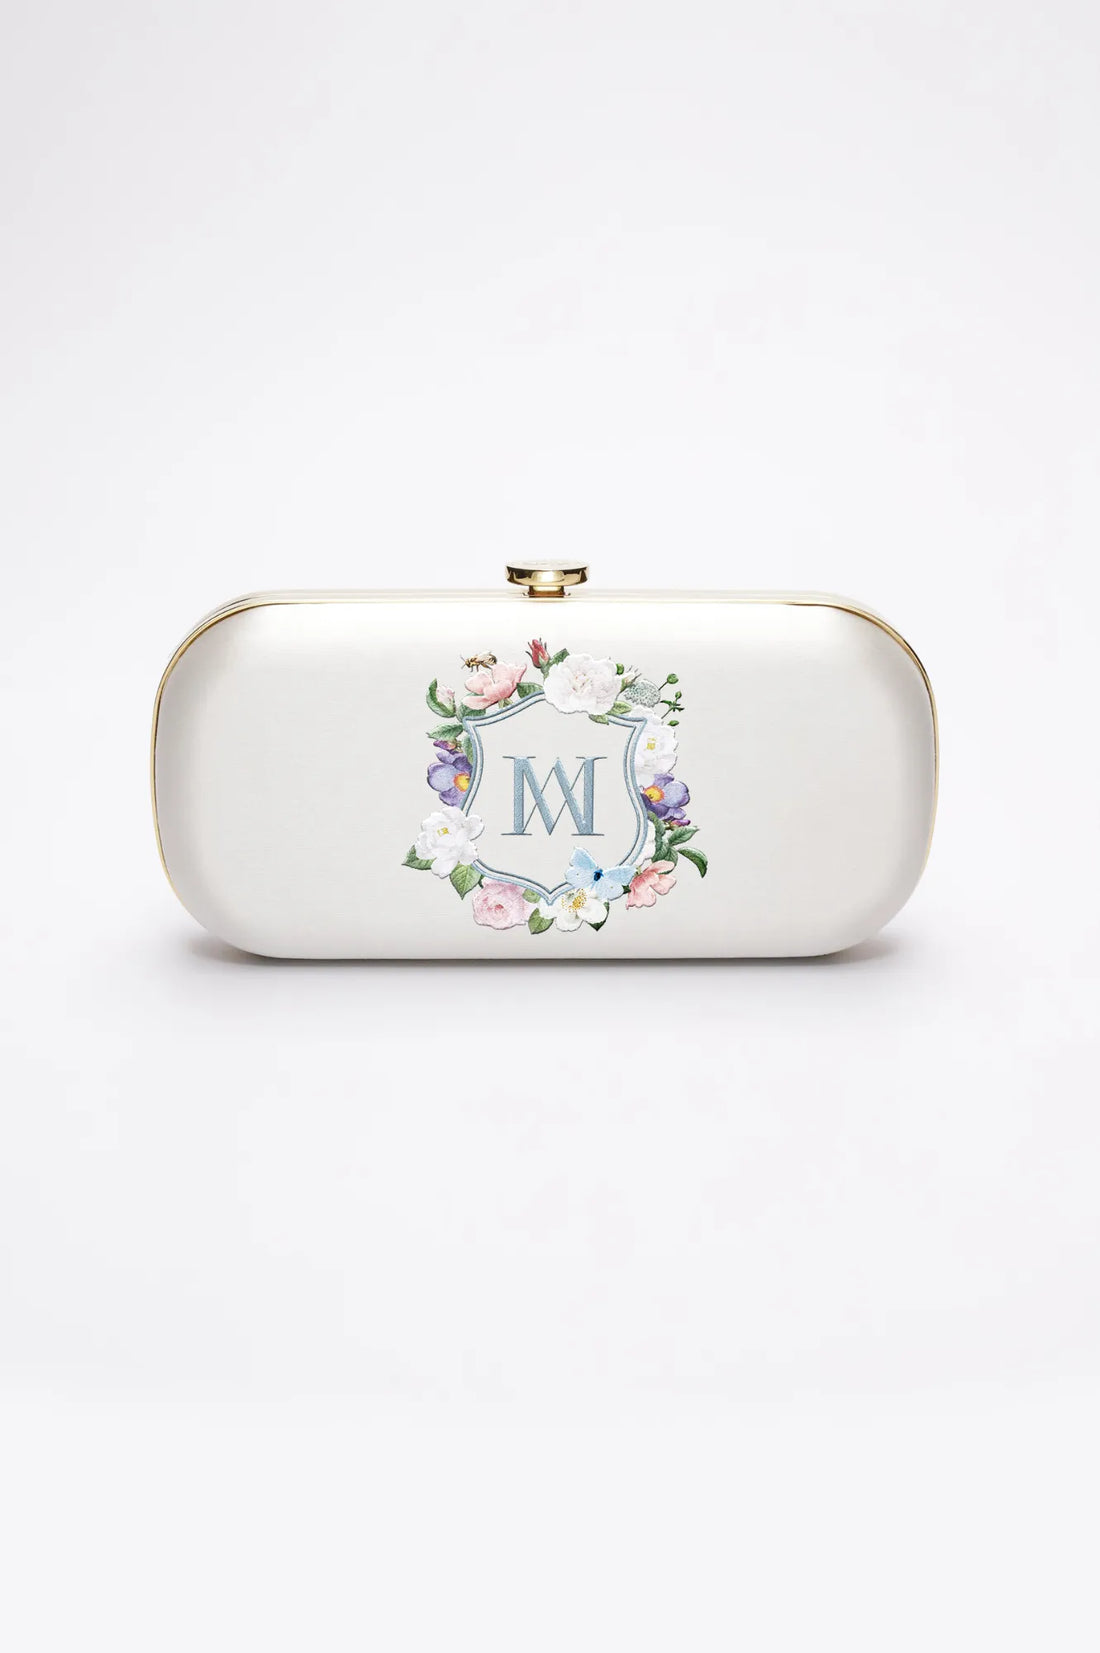 A Ivory Satin Bella Clutch - Monogram Floral Crest from The Bella Rosa Collection.